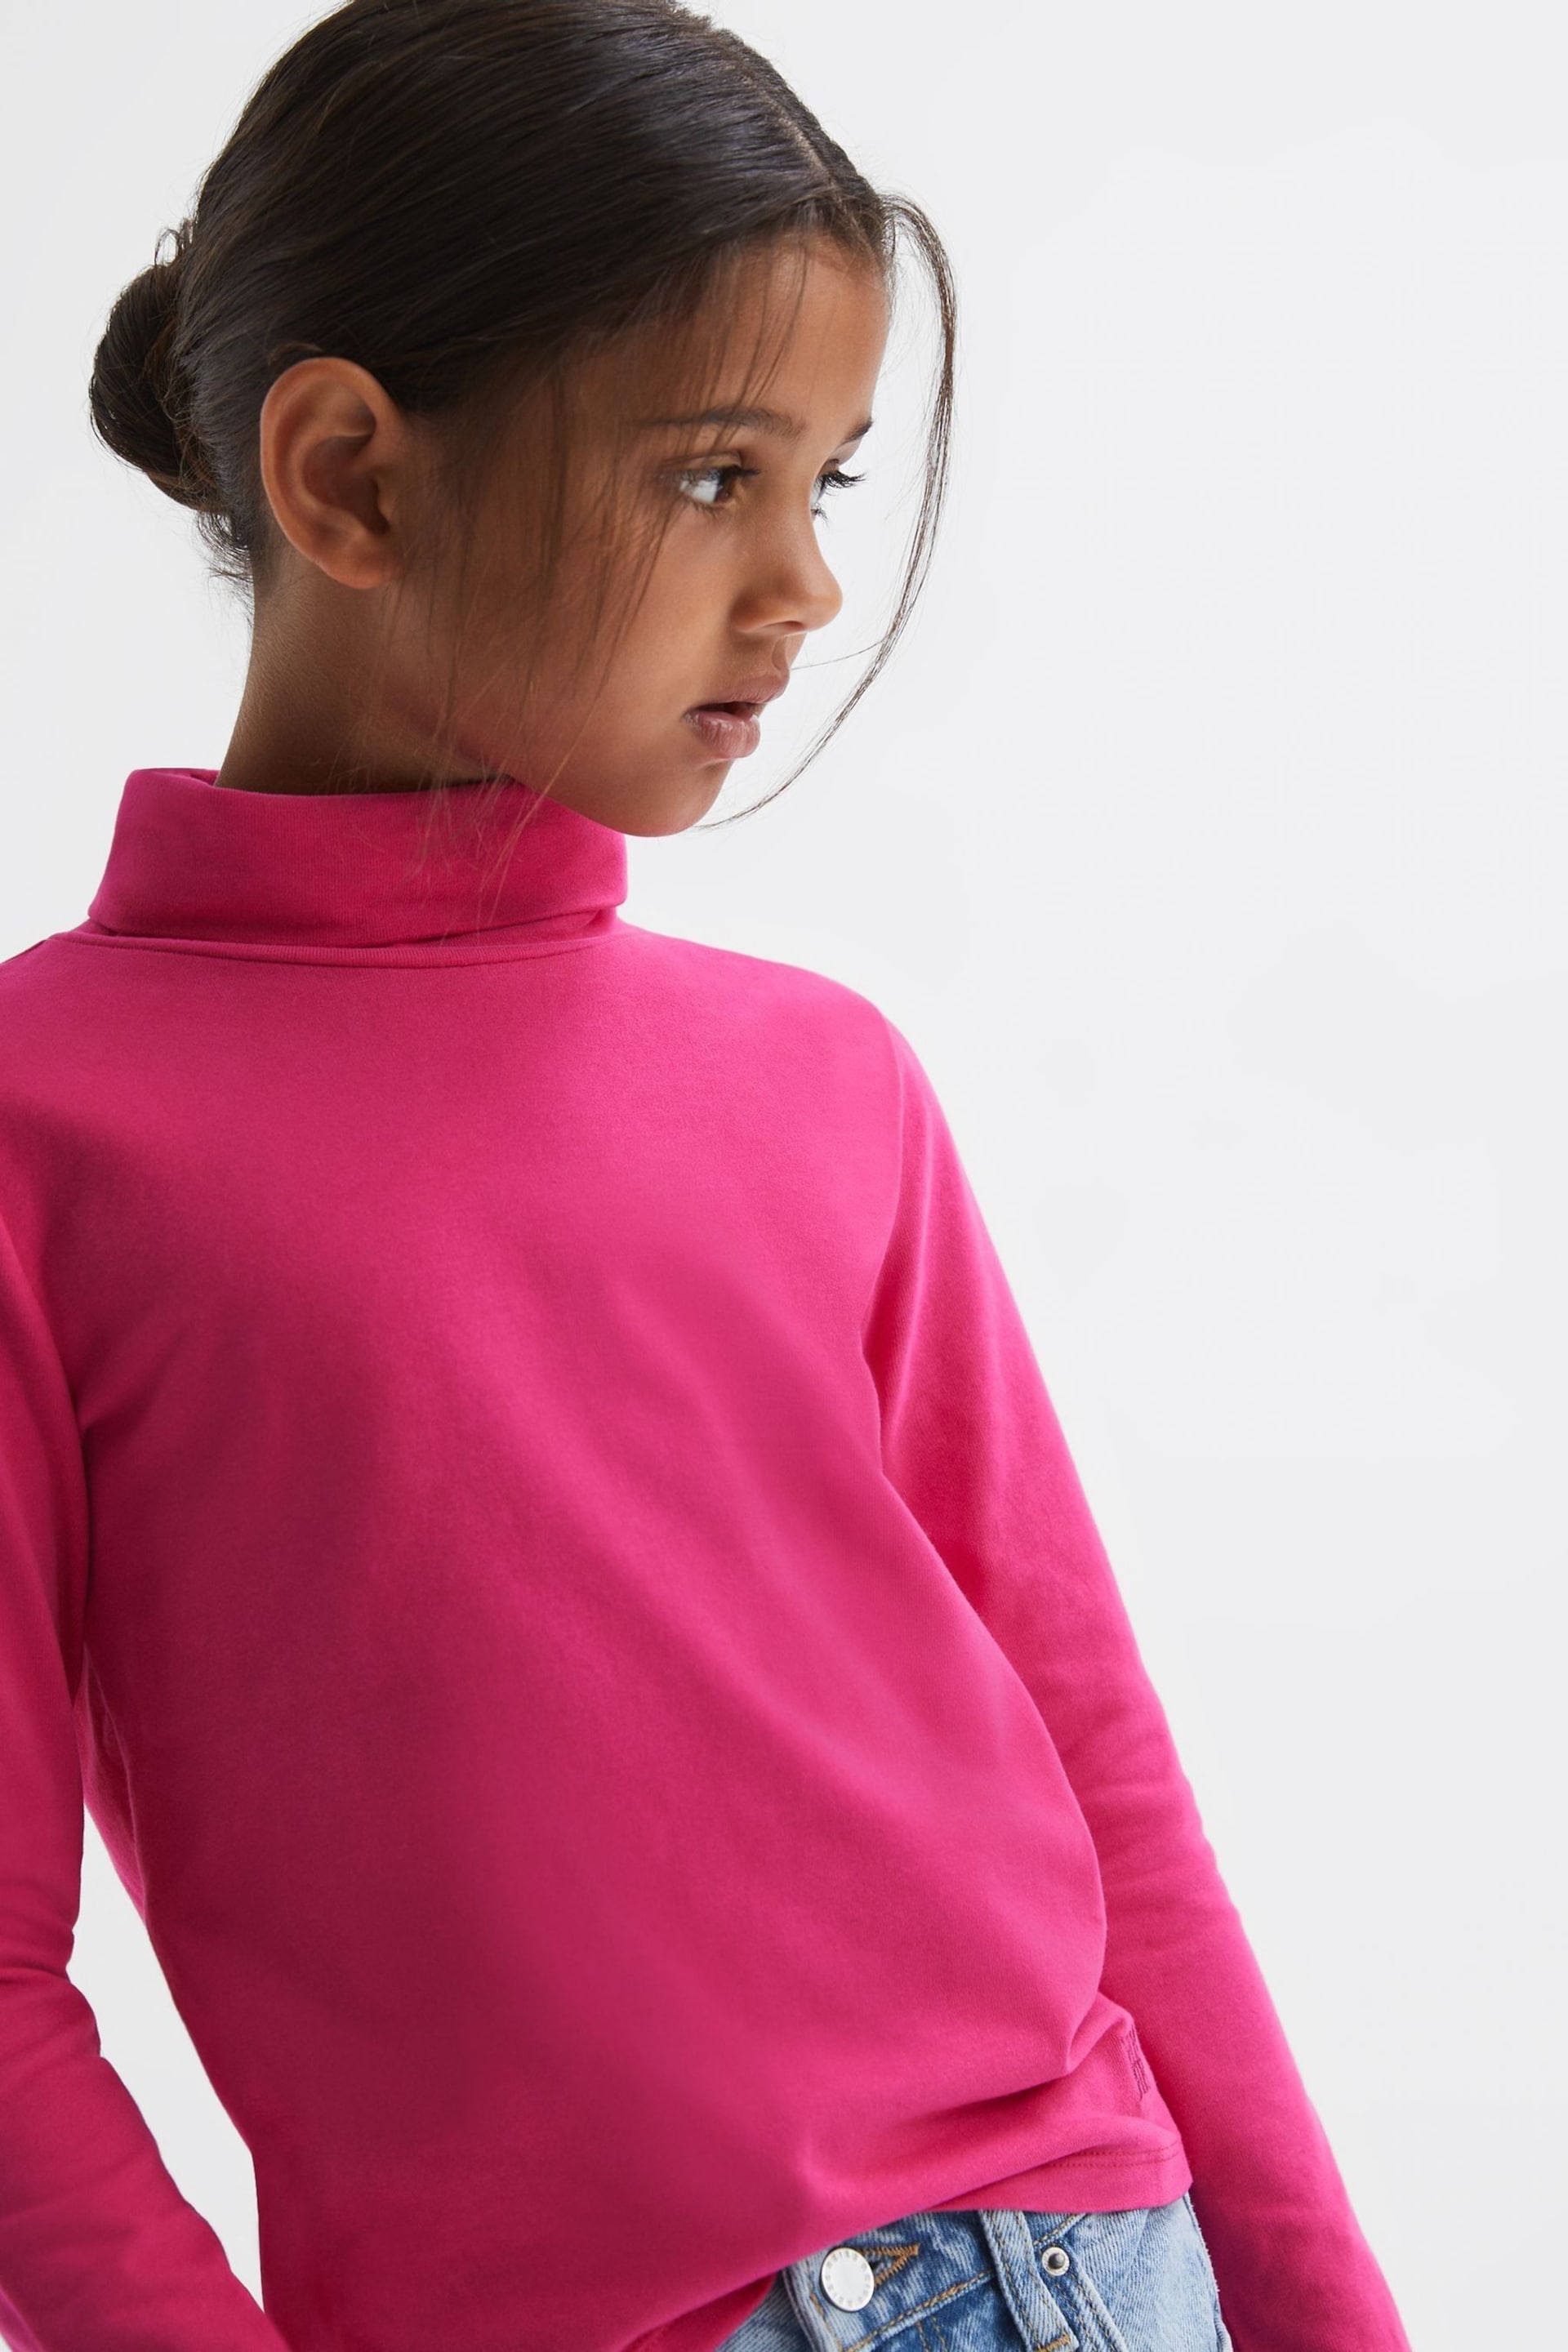 Reiss Bright Pink Carey Junior Cotton Blend Roll Neck Top - Image 1 of 5